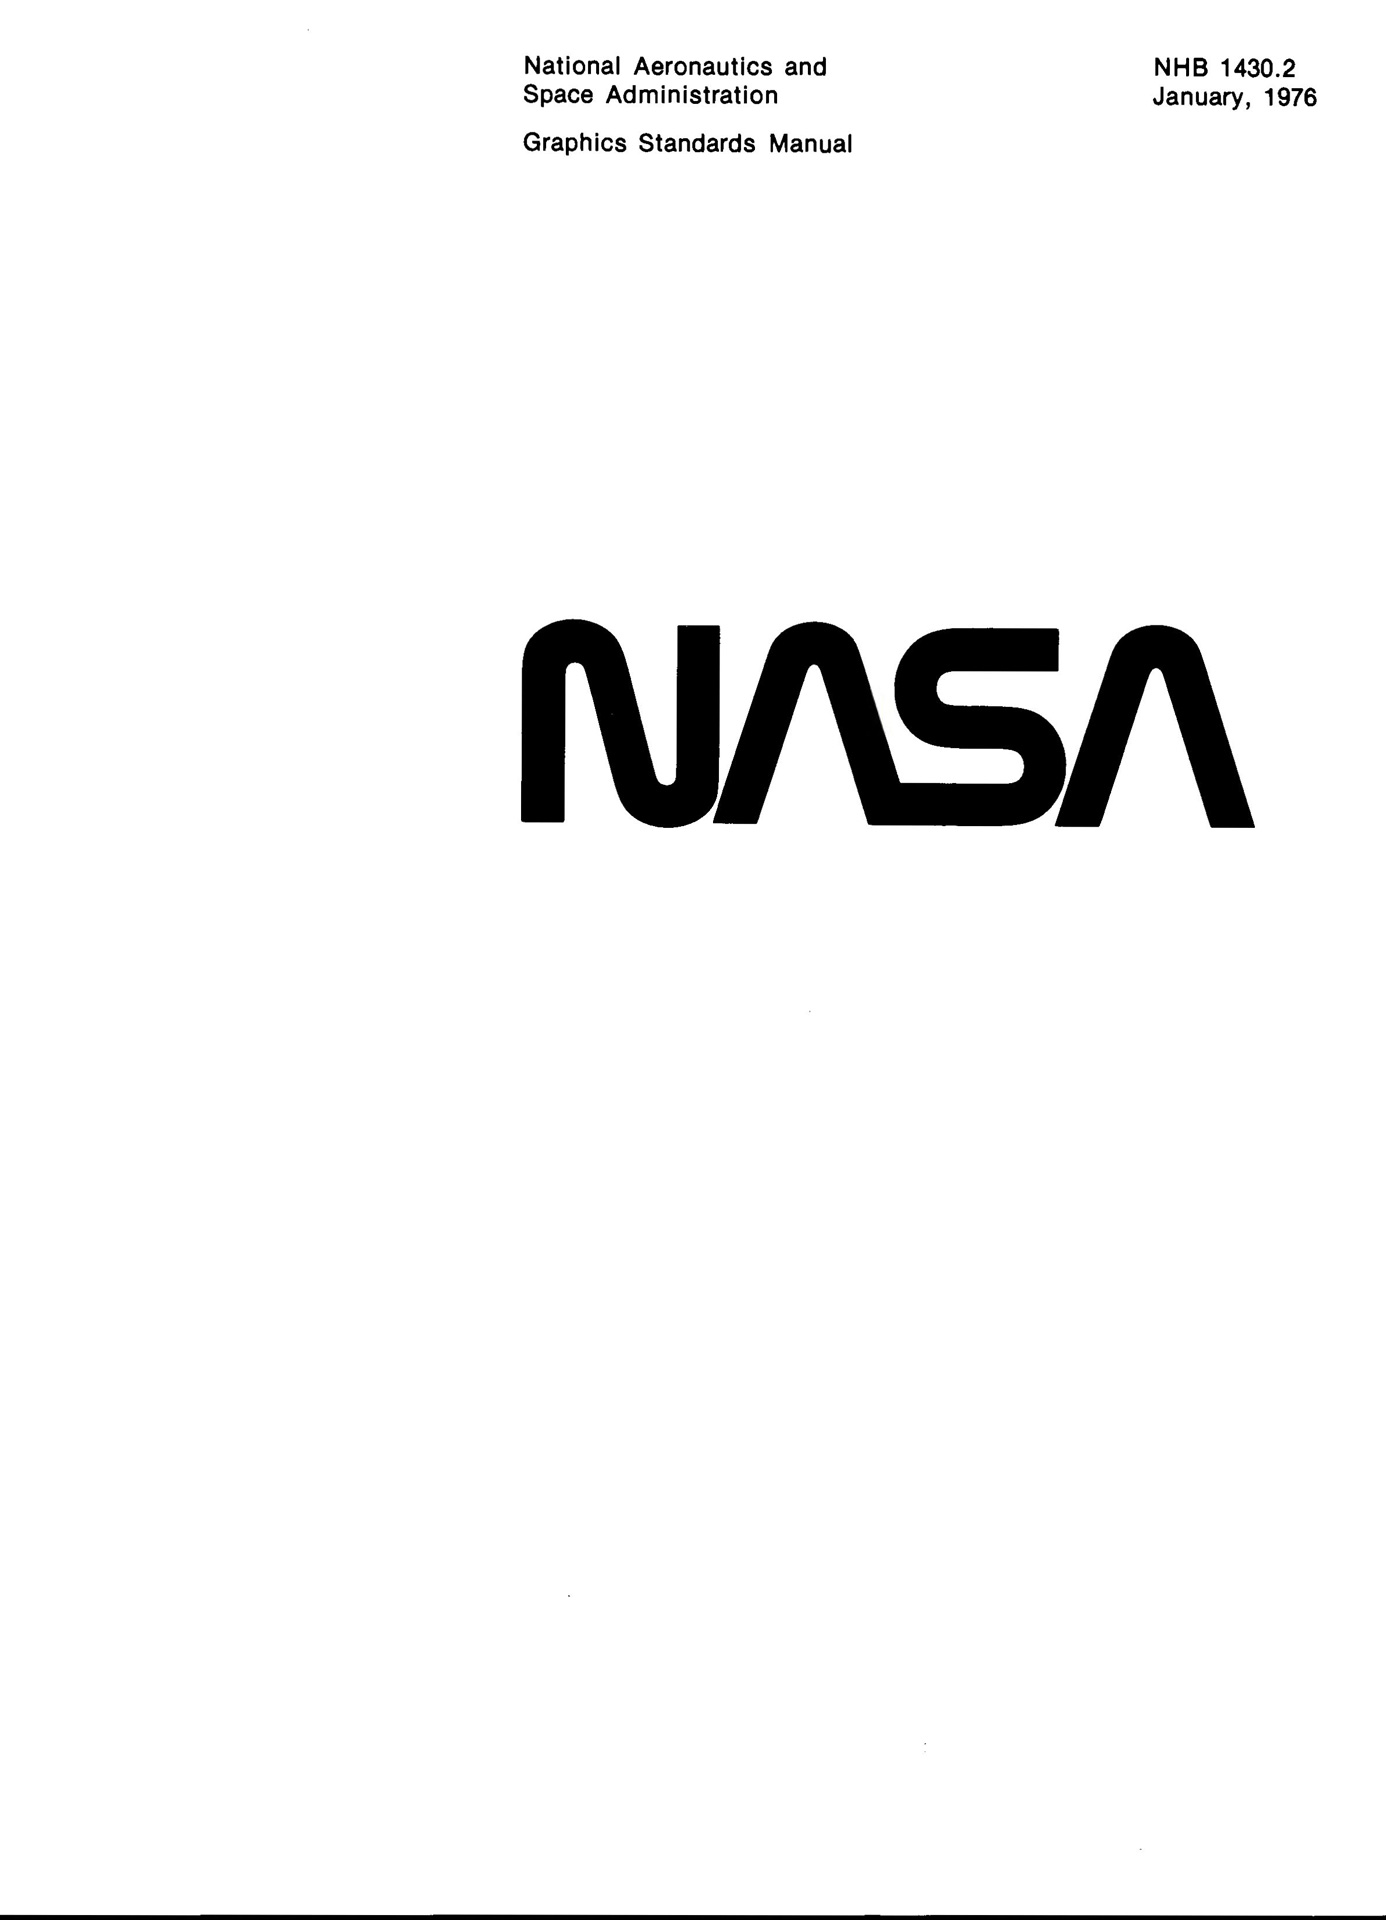 Cover of the NASA Graphics Standards Manual, 1976